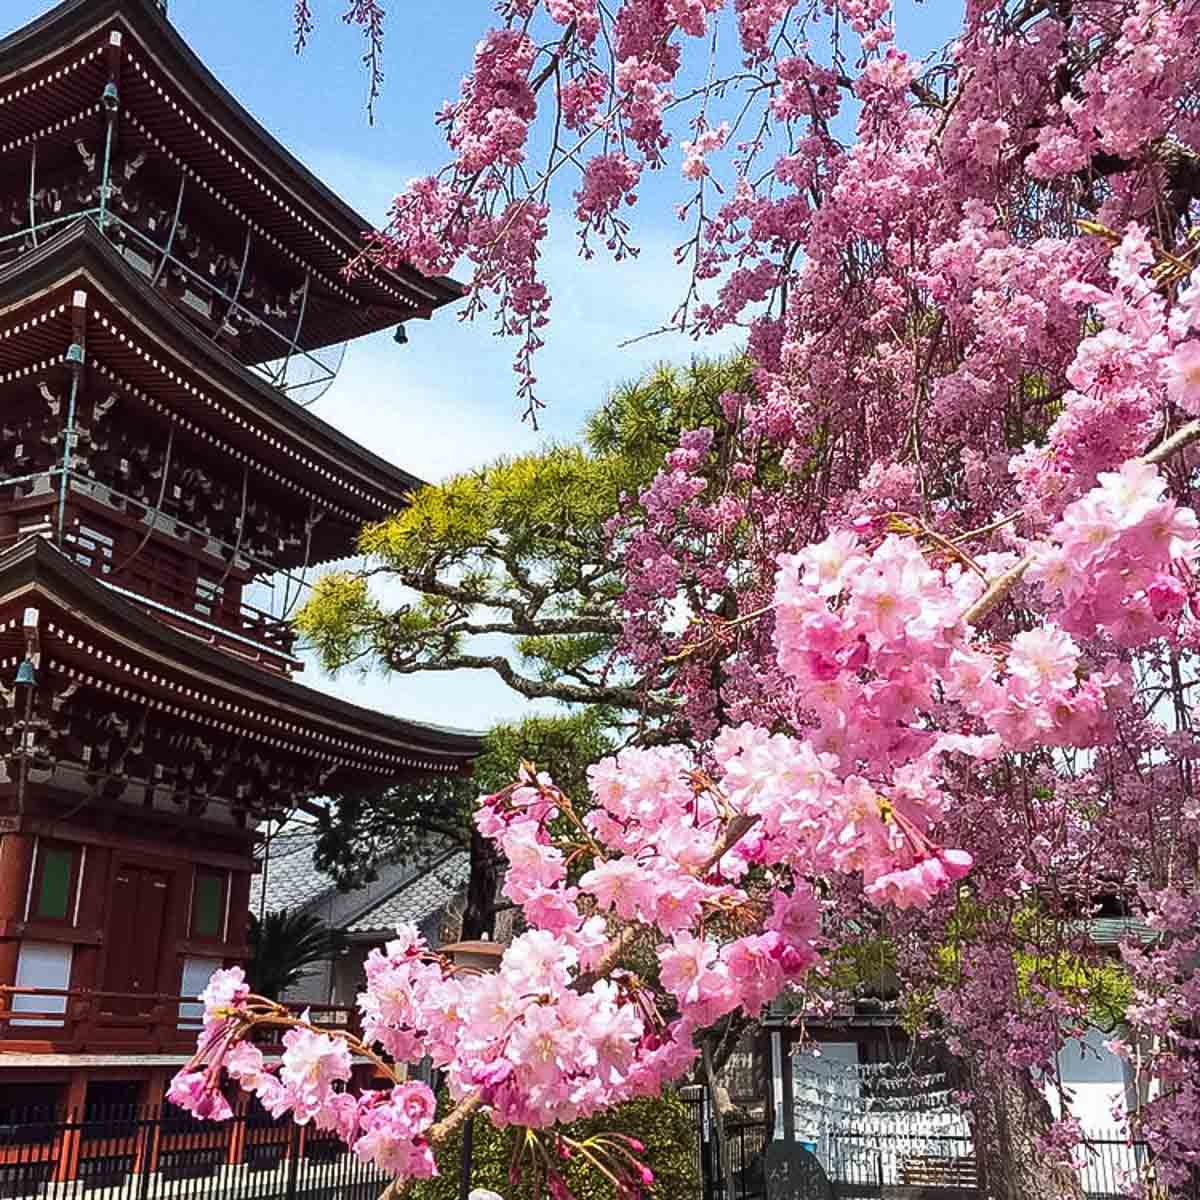 Pink Sakura tree with a temple in the background in Japan.